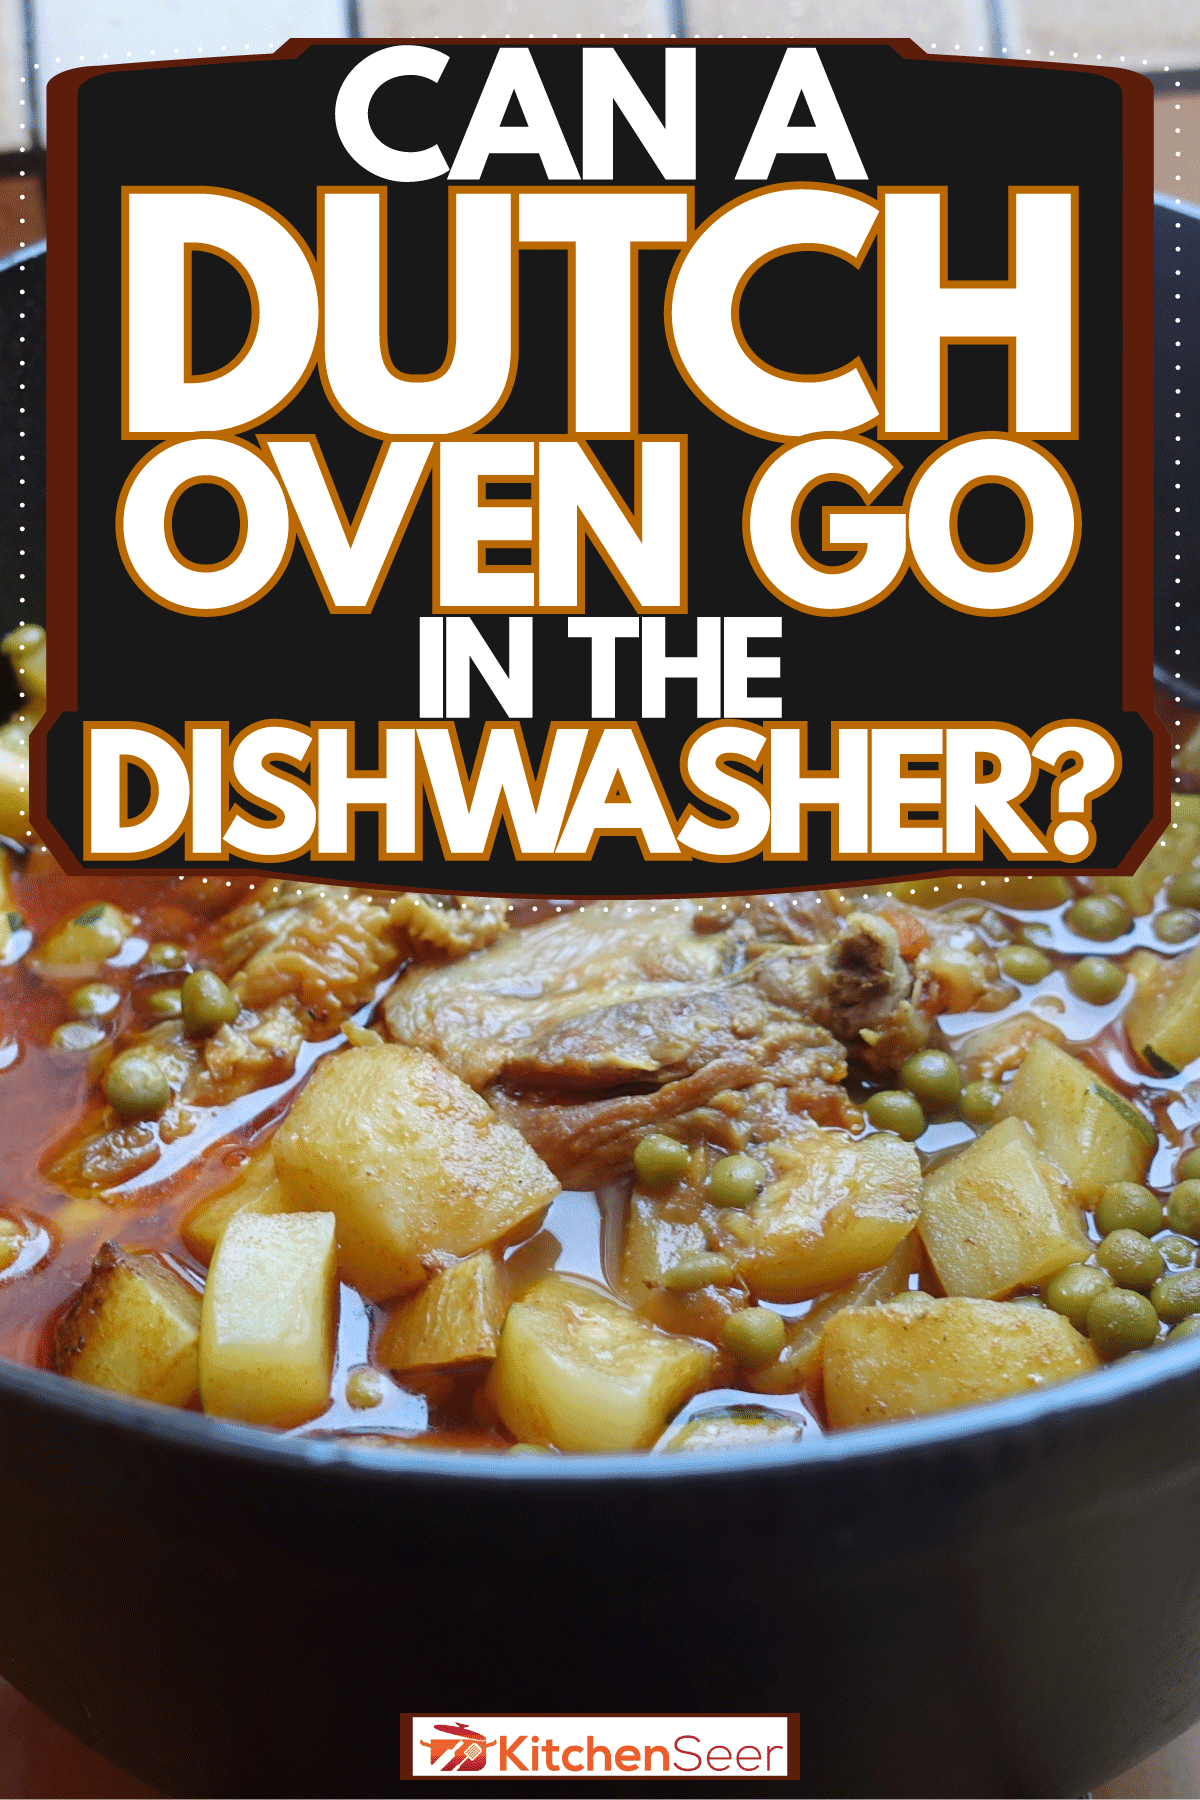 A Mediterranean cuisine using chicken, potatoes and green peas, Can A Dutch Oven Go In The Dishwasher?